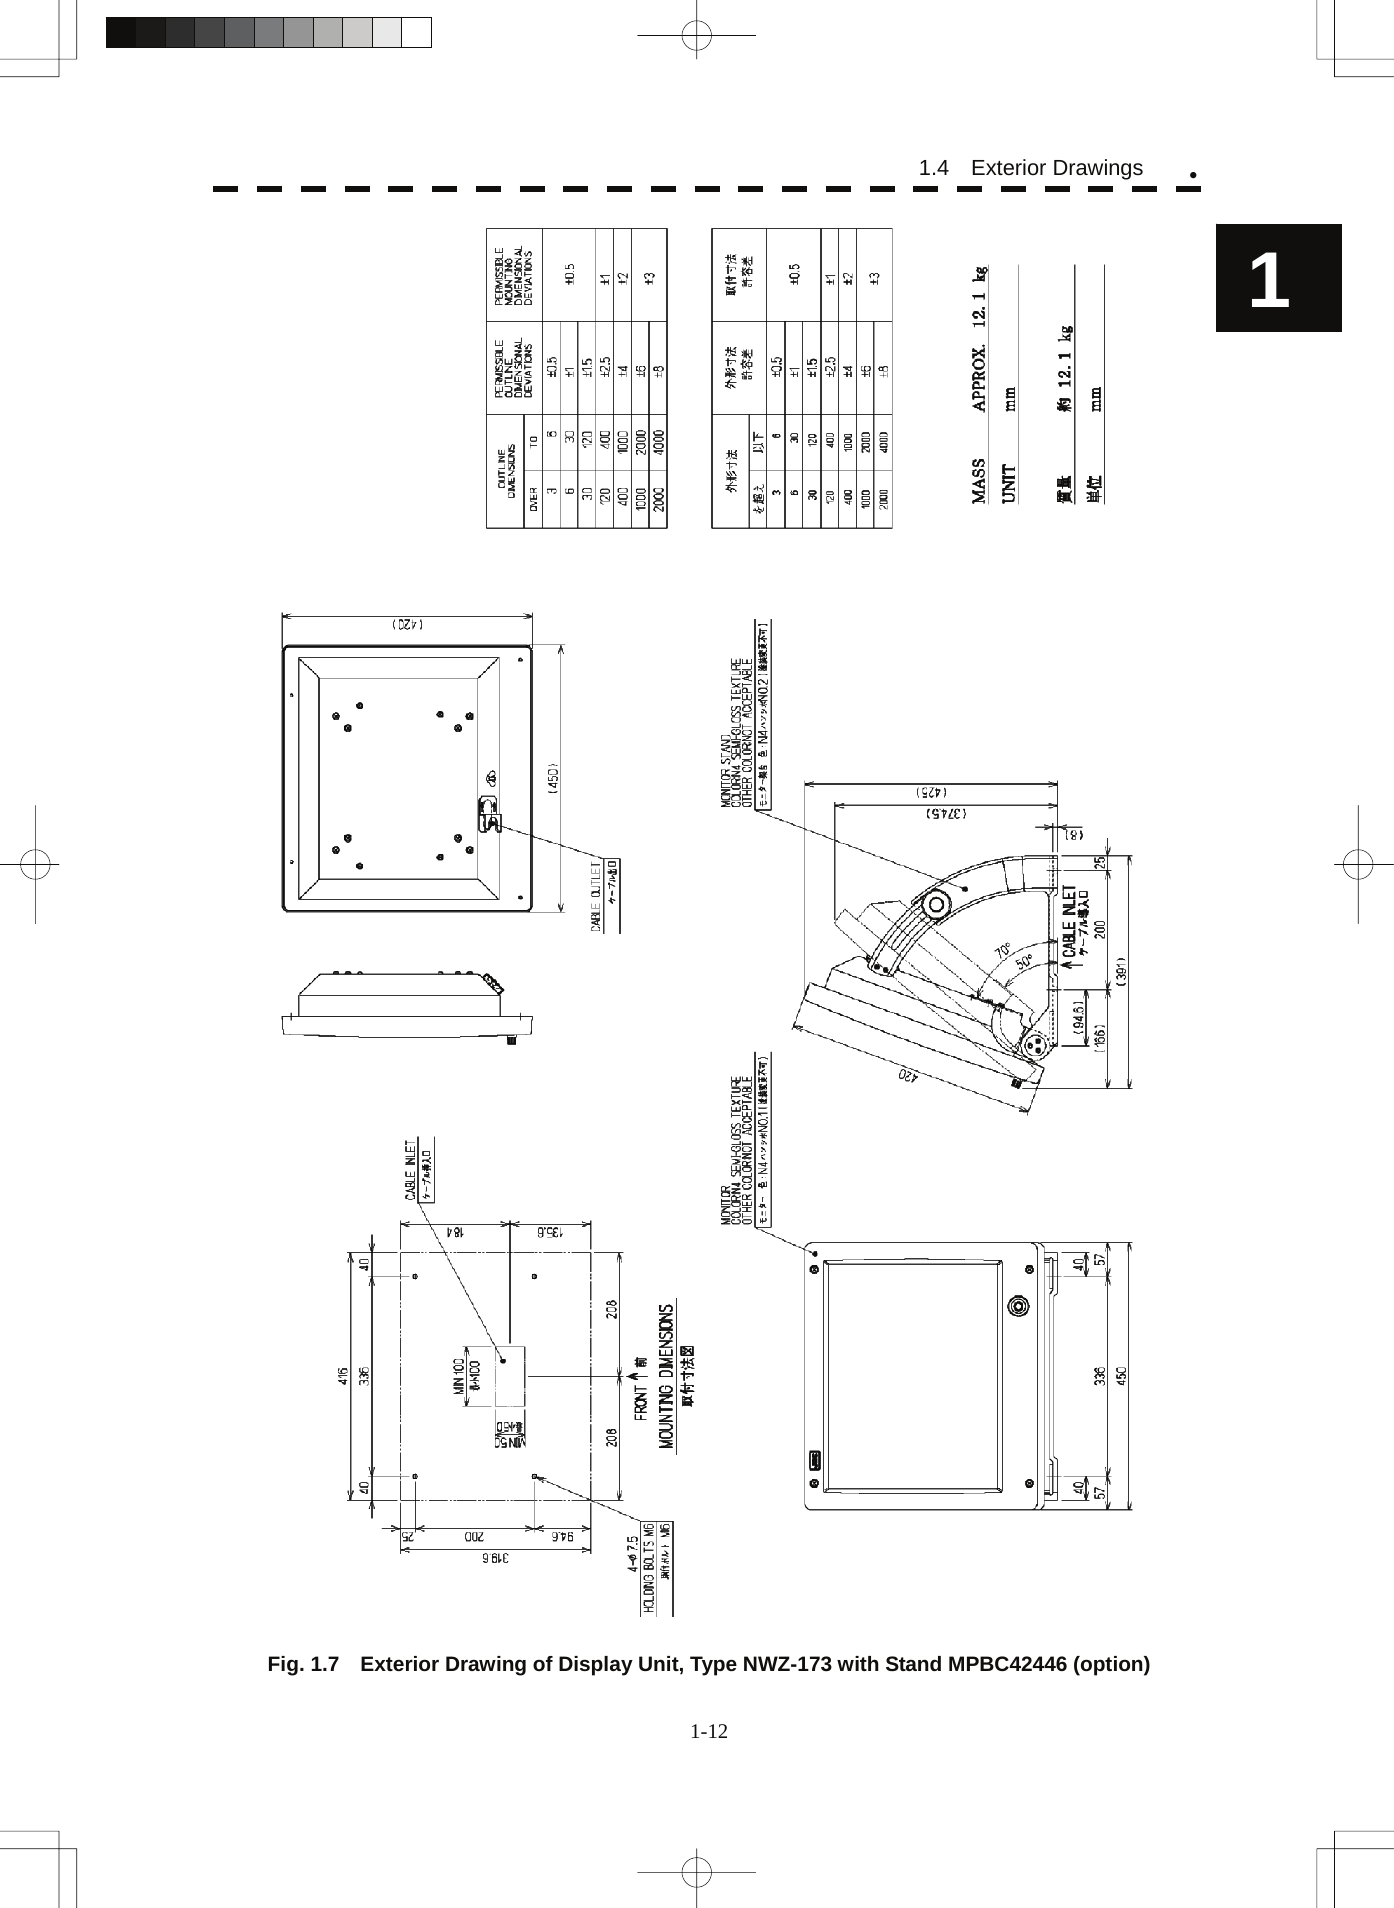  1.4  Exterior Drawings y1  Fig. 1.7    Exterior Drawing of Display Unit, Type NWZ-173 with Stand MPBC42446 (option) 1-12 